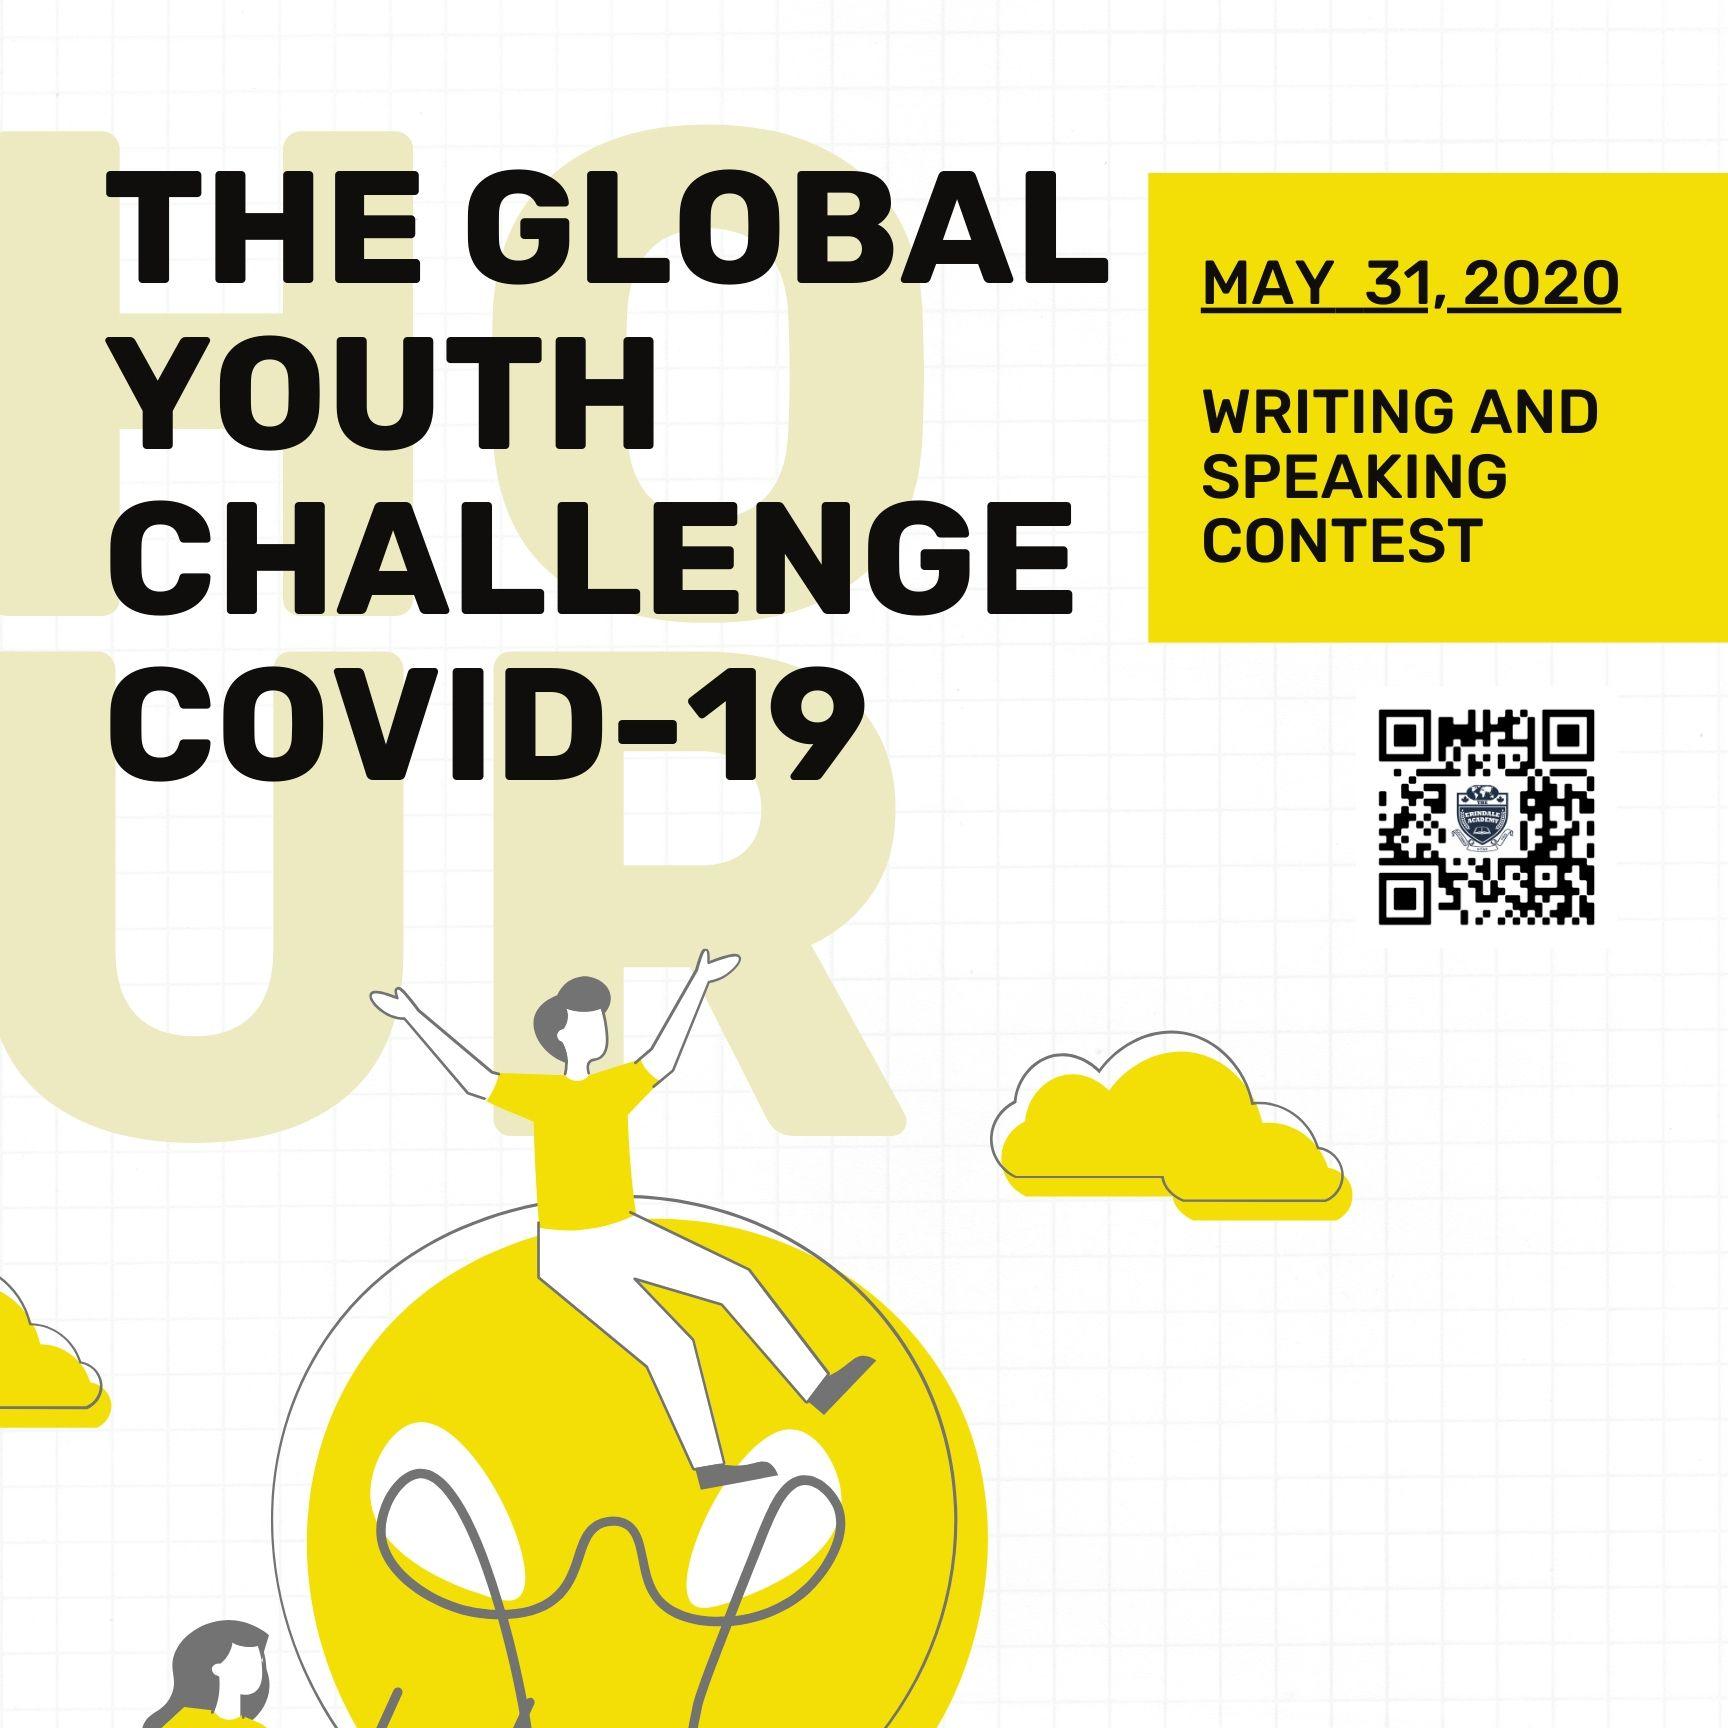 The Global Youth Challenge launched by the Erindale Academy